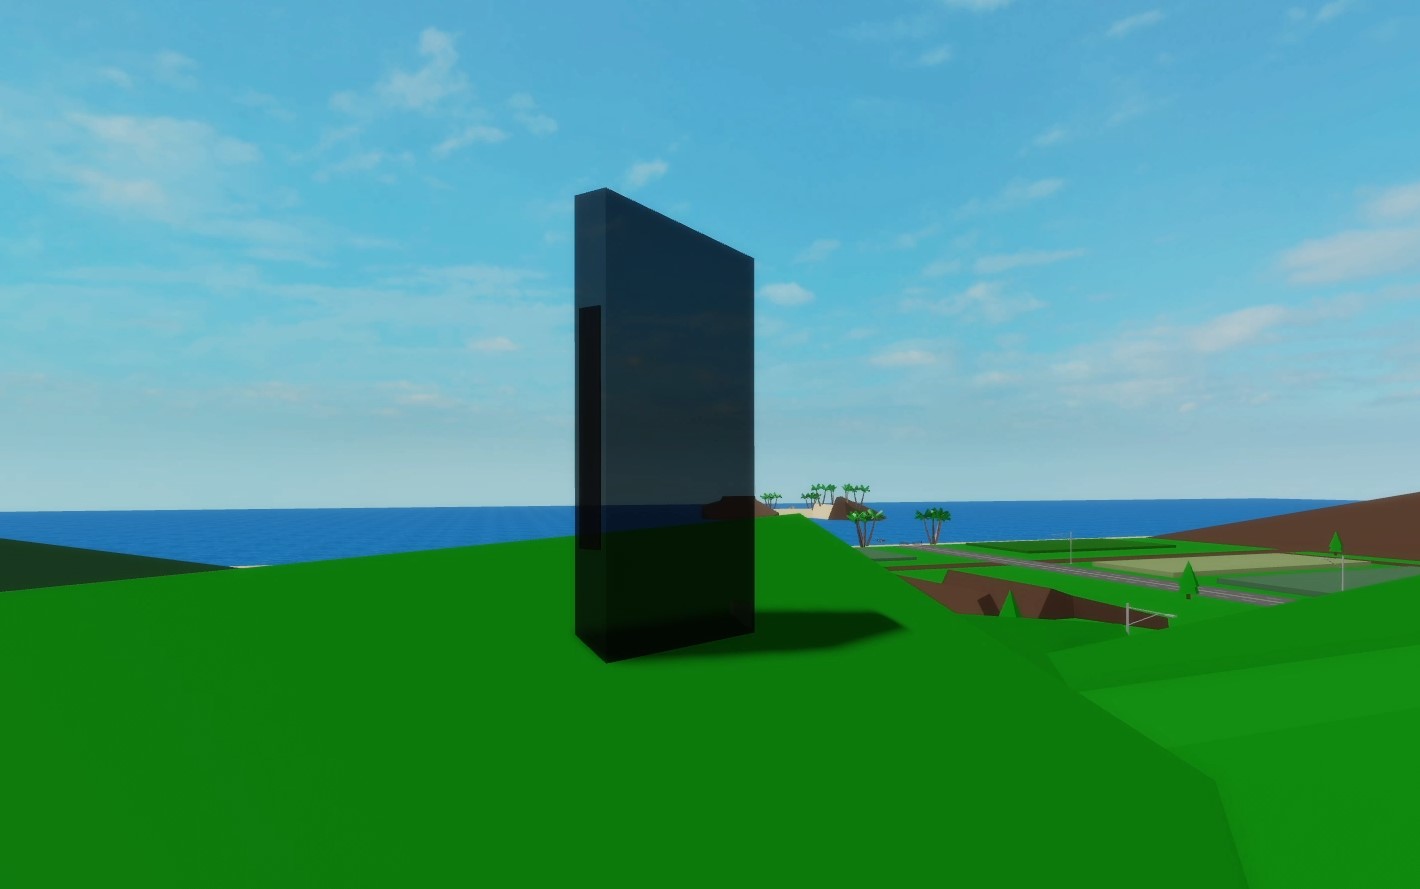 Monolith actively despawning, fading away